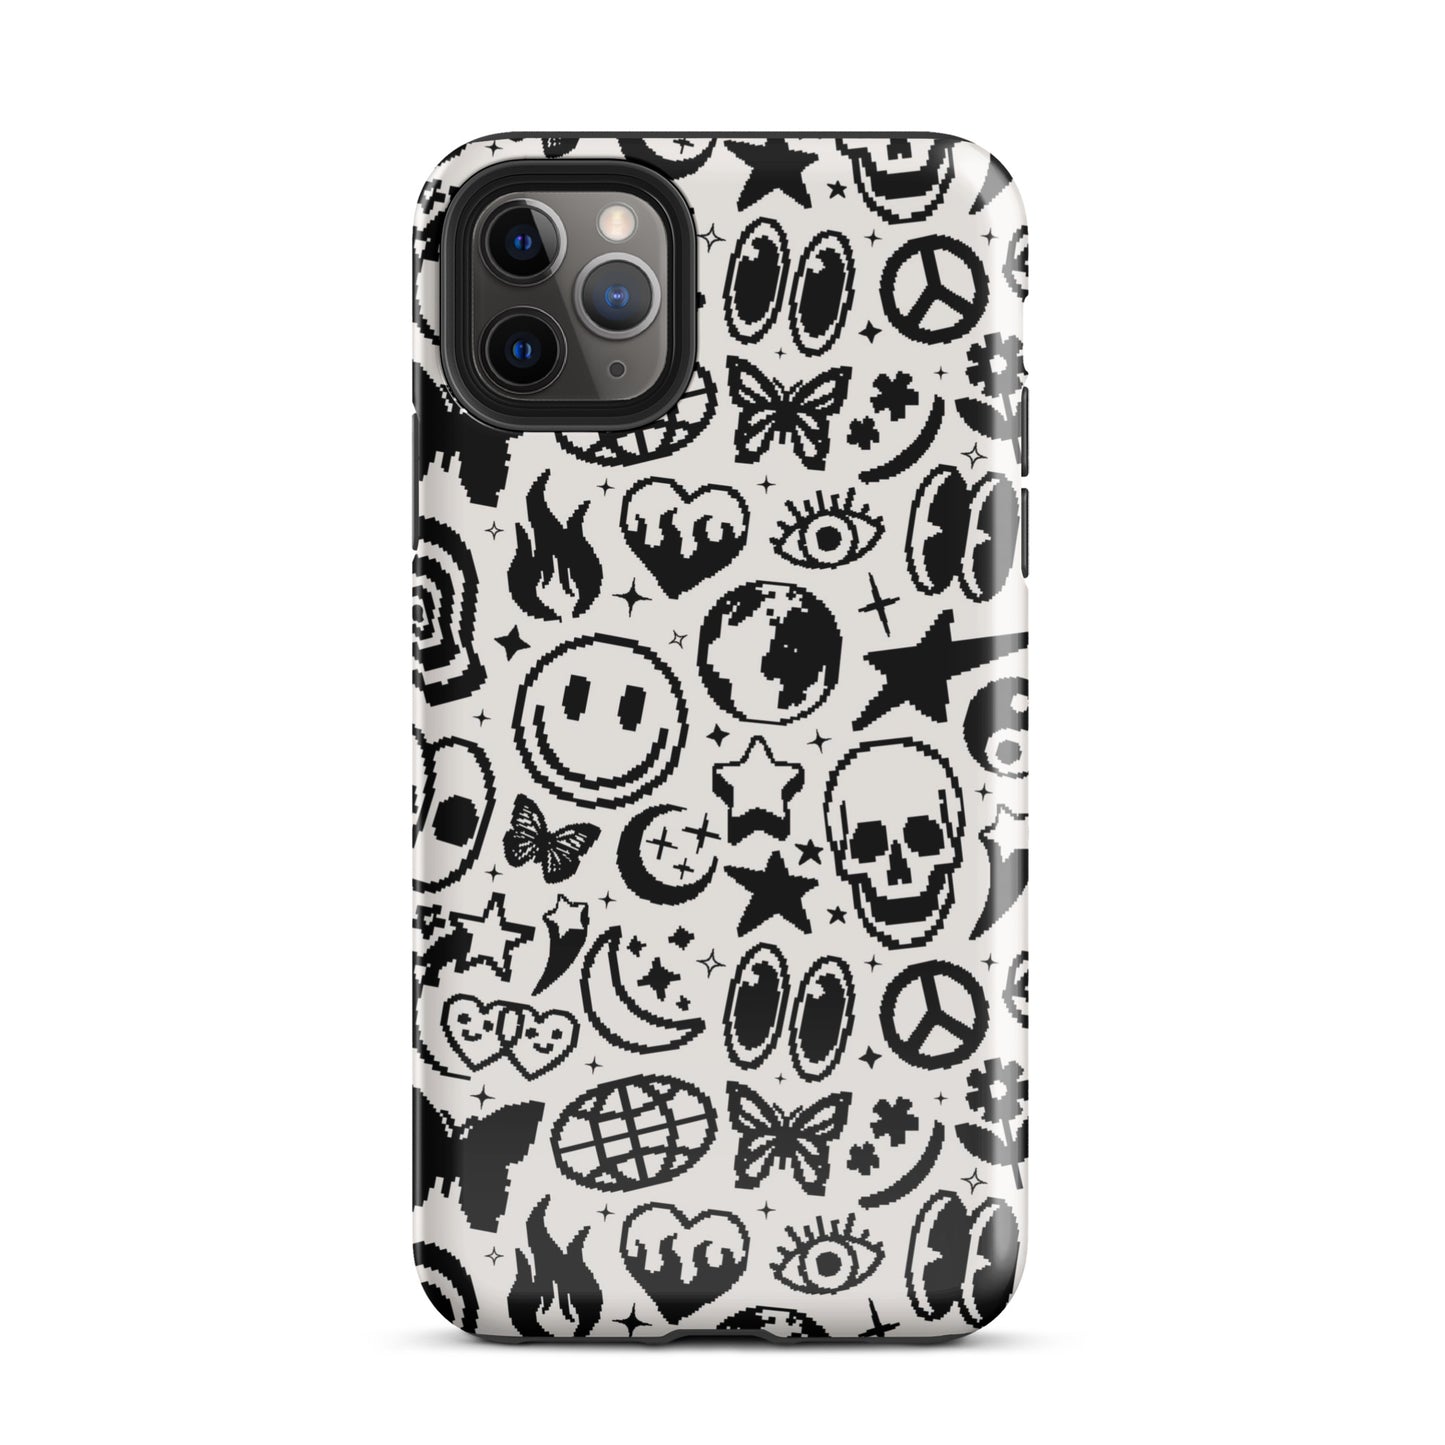 Pixel Vibes iPhone Case iPhone 11 Pro Max Glossy